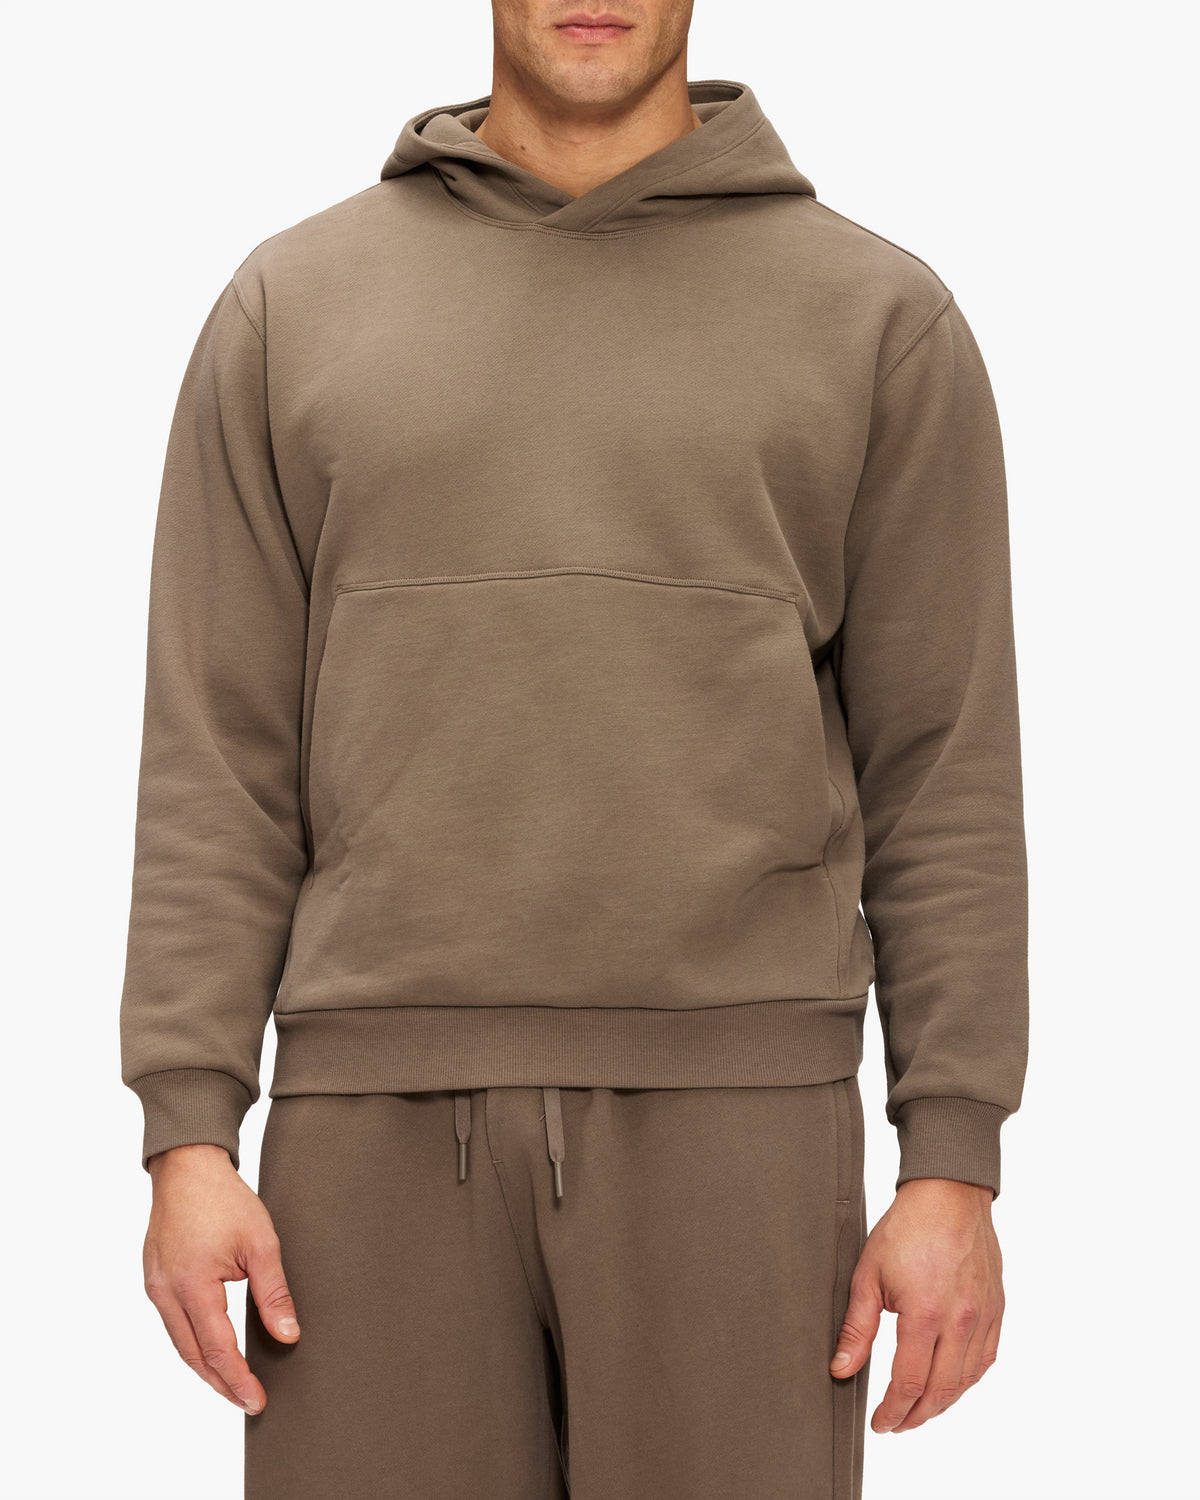 Lululemon Steady State Pullover Hoodie – The Shop at Equinox